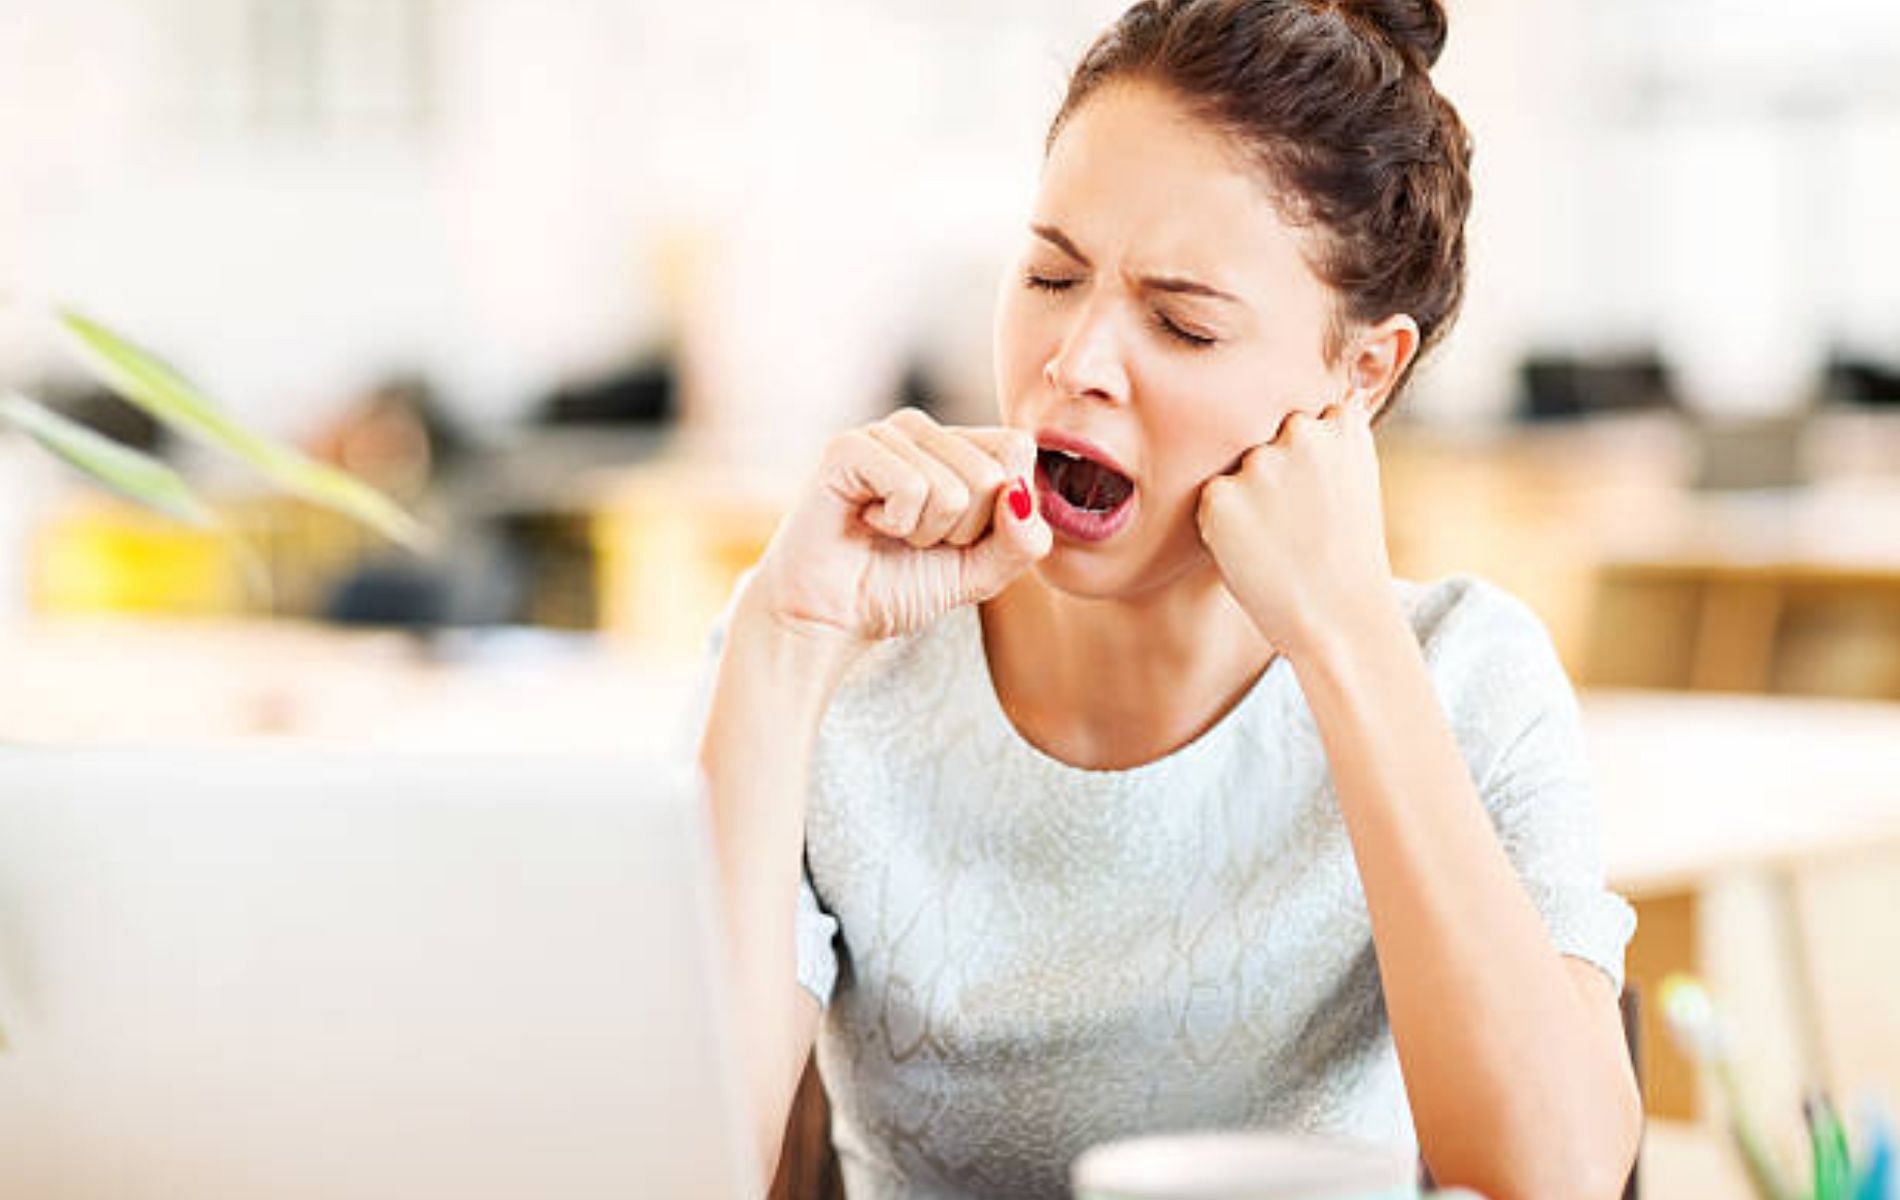 What makes yawning contagious? (Image by iStockphotos via Pexels)